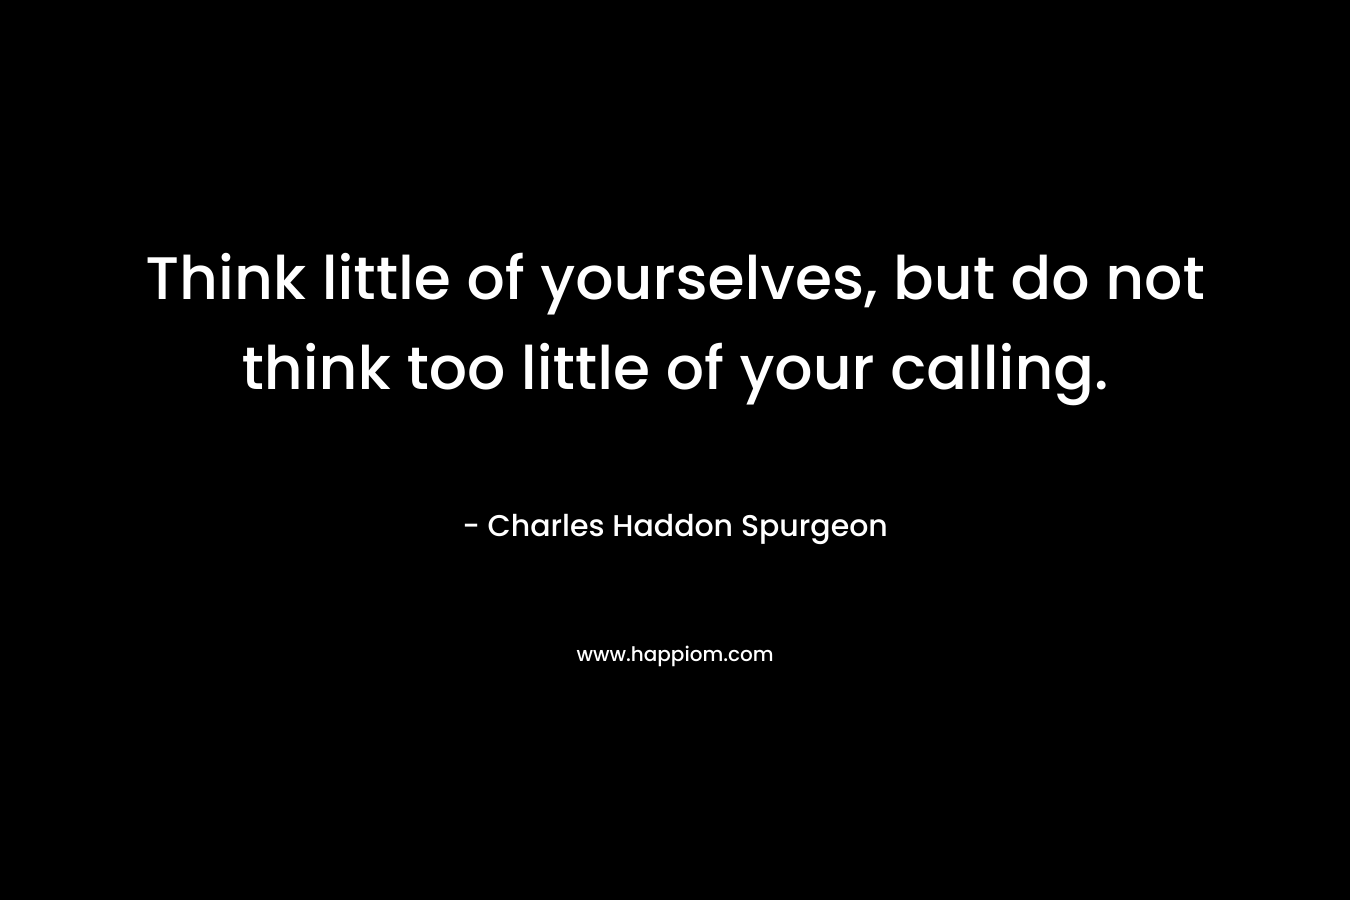 Think little of yourselves, but do not think too little of your calling.